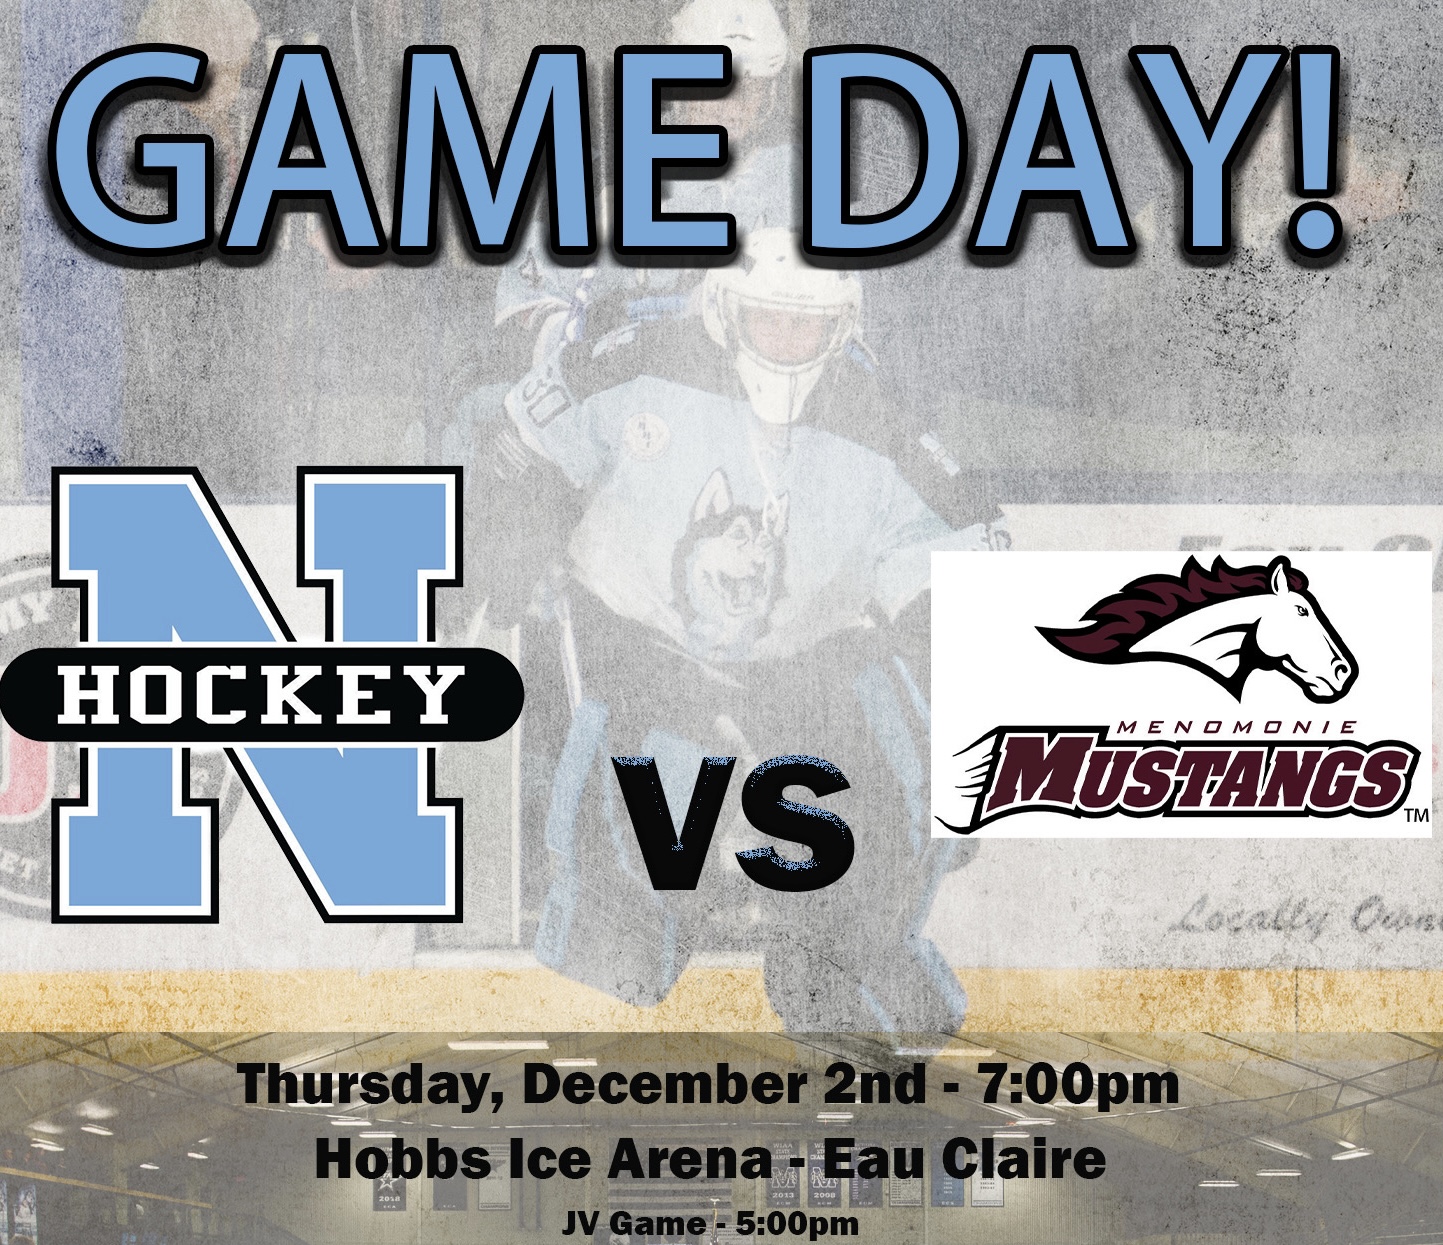 E.C North Hockey on Twitter: "North Hockey Day and the Home Opener for your Huskies so let's pack Hobbs Ice Center. #NorthHockey #LetsGoHuskies https://t.co/Y6pvNvYu2D" / Twitter